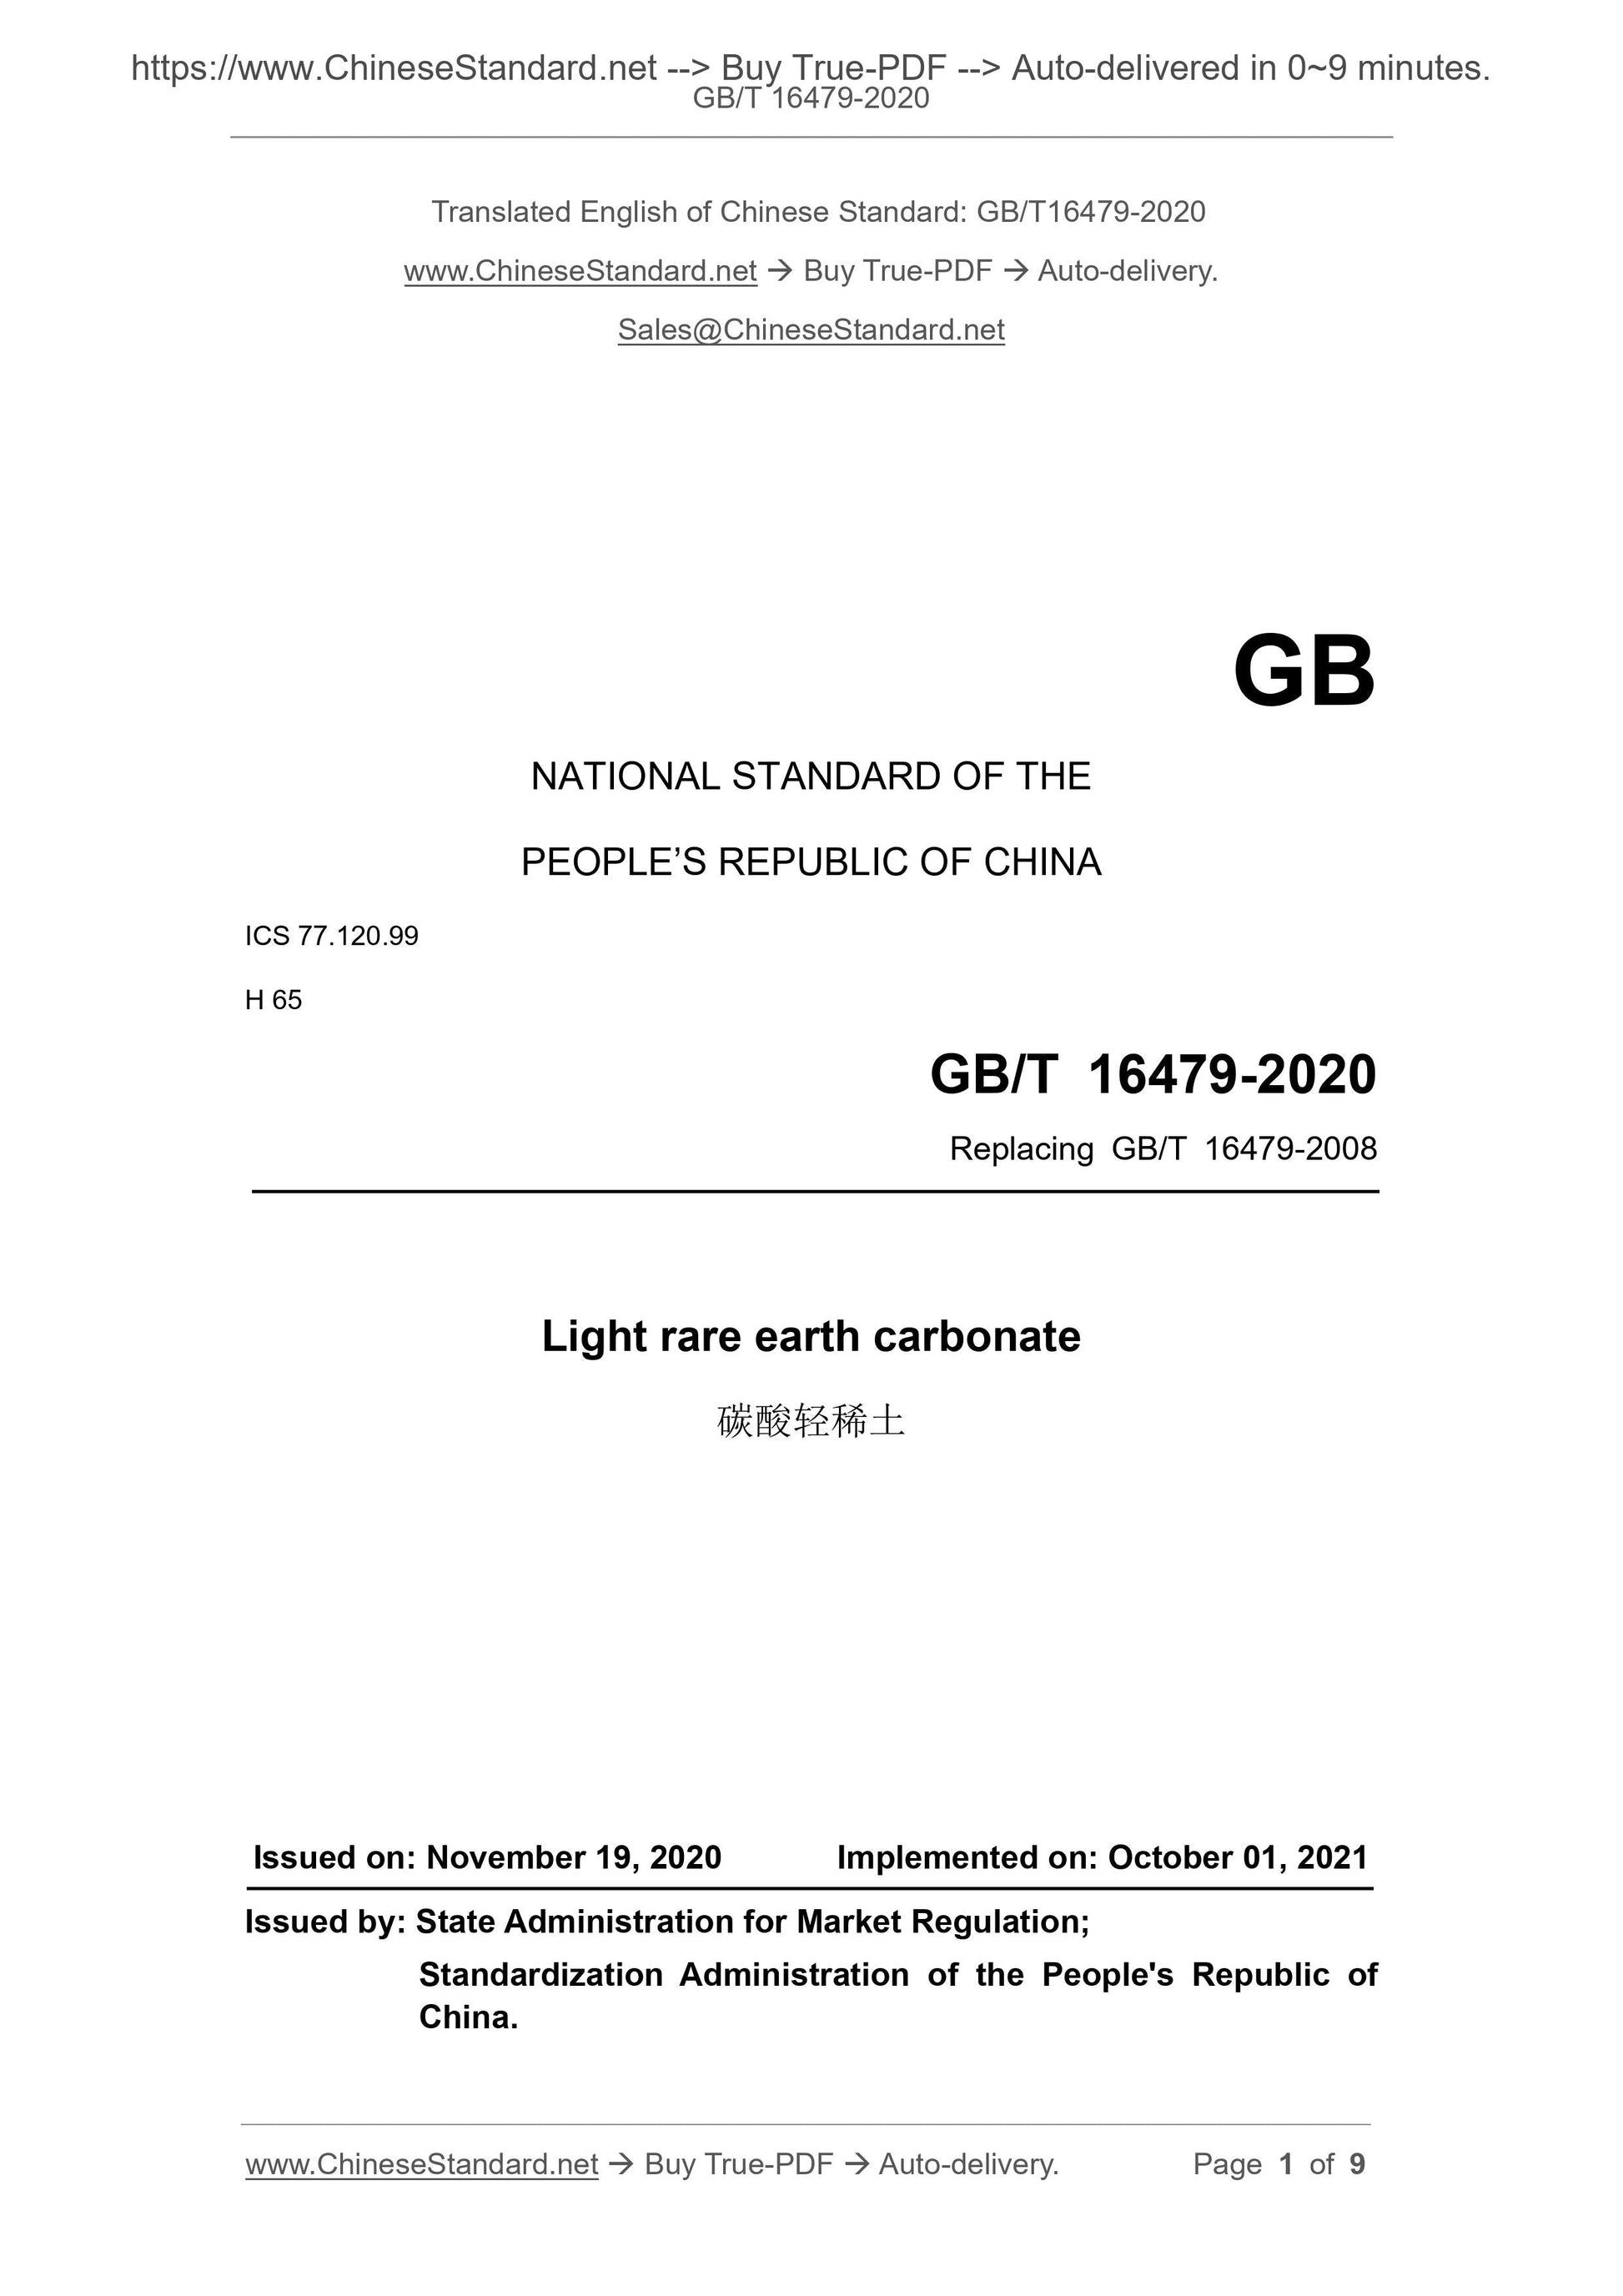 GB/T 16479-2020 Page 1